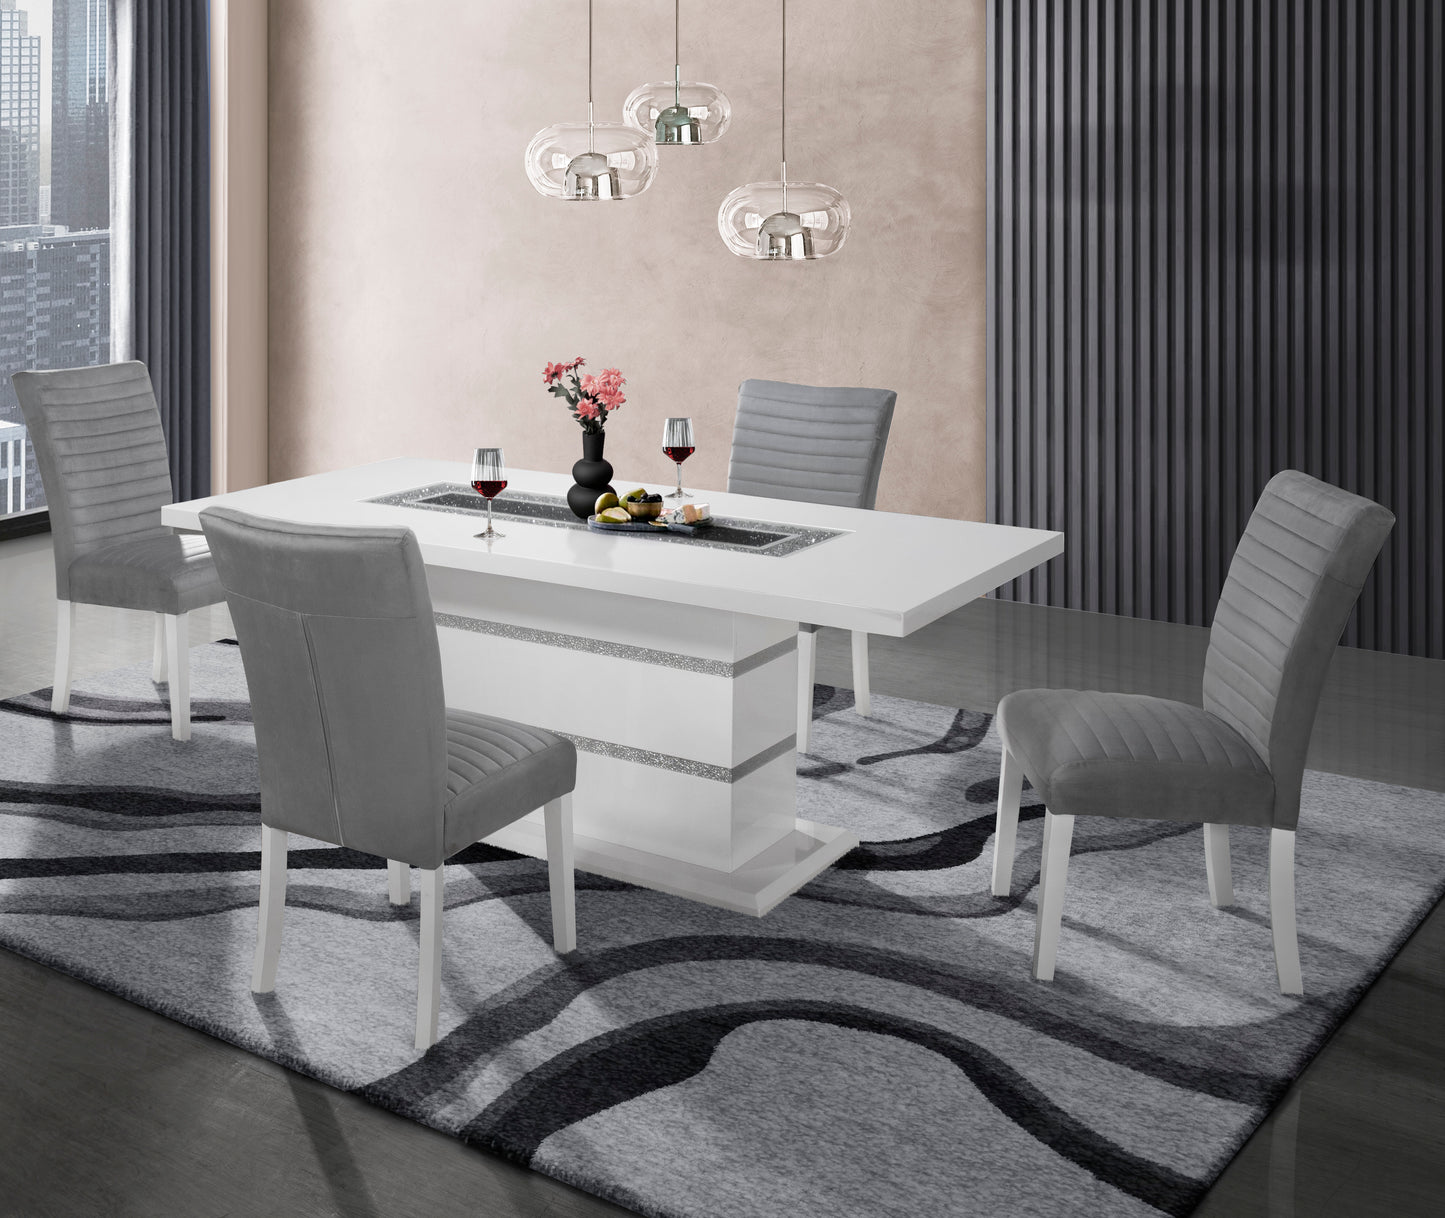 San Pablo II 5 Piece Dining Set with Channeled Fabric Chairs